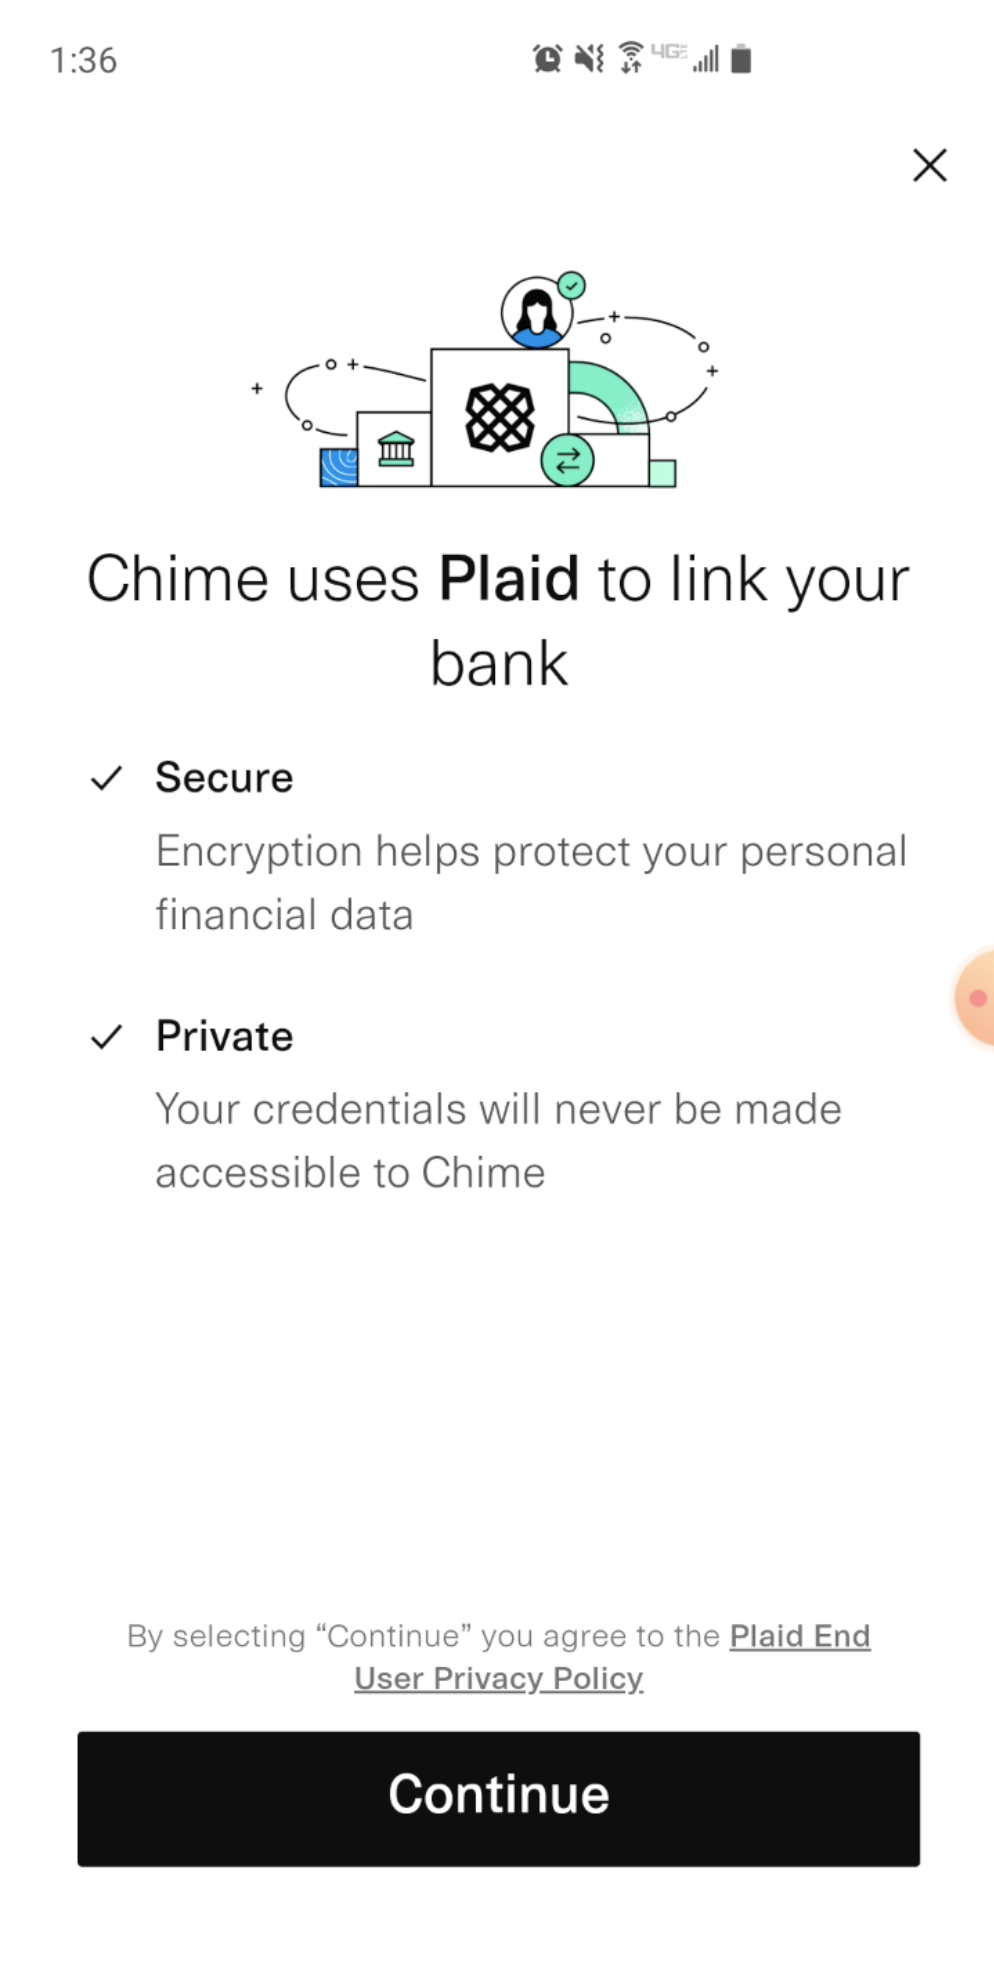 A screenshot of the Plaid banking app describing how it connects with Chime.